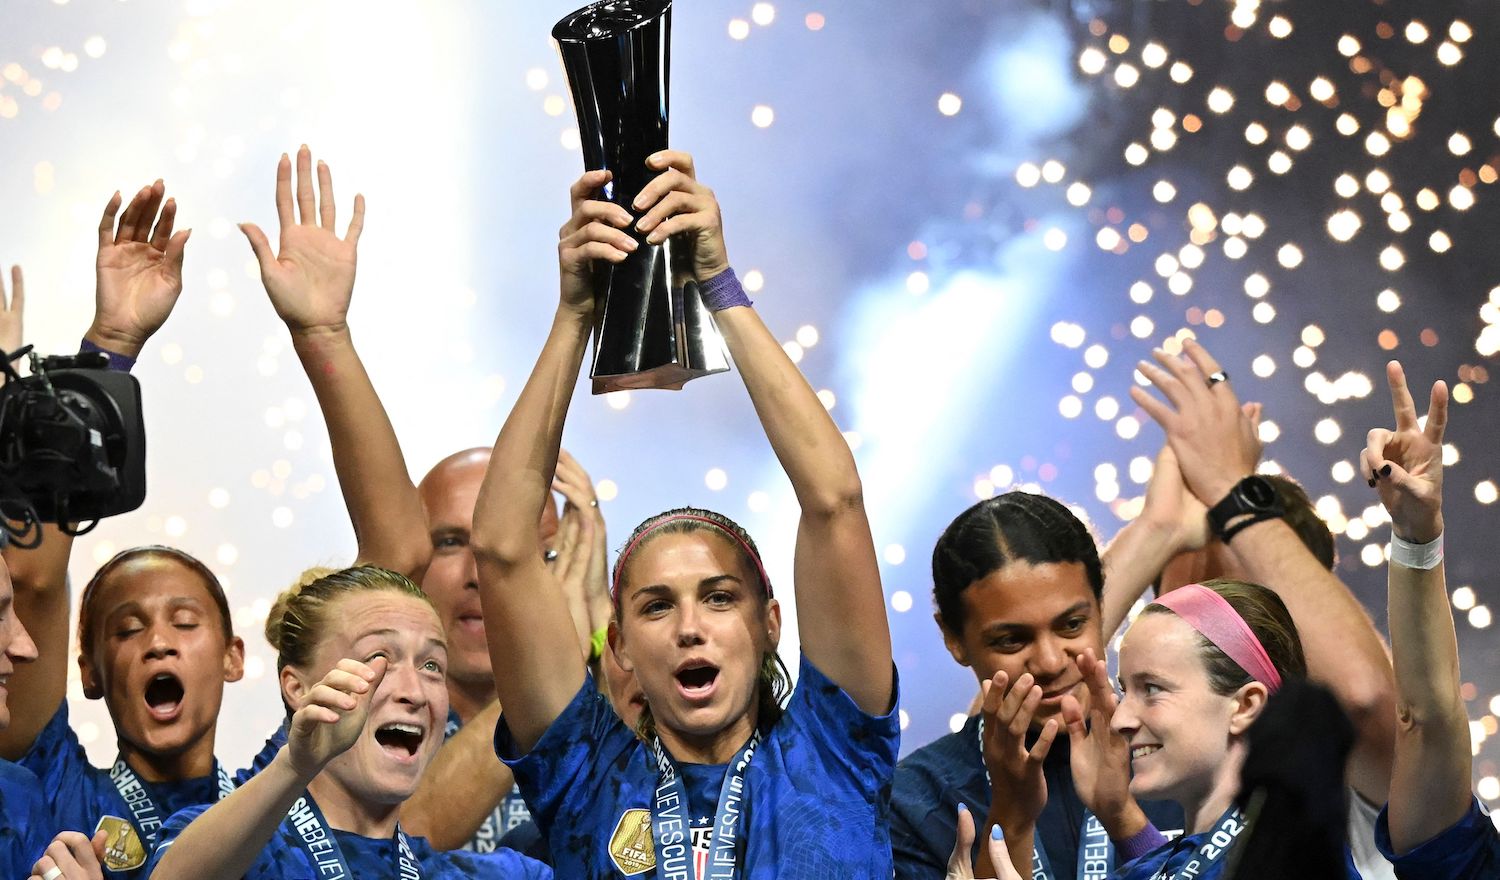 TOPSHOT - United States forward Alex Morgan (C) raises the SheBelieves Cup trophy as the United States Womens National Soccer Team celebrates following the 2023 SheBelieves Cup soccer match between the United States and Brazil at Toyota Stadium in Frisco, Texas, on February 22, 2023. (Photo by Patrick T. Fallon / AFP) (Photo by PATRICK T. FALLON/AFP via Getty Images)